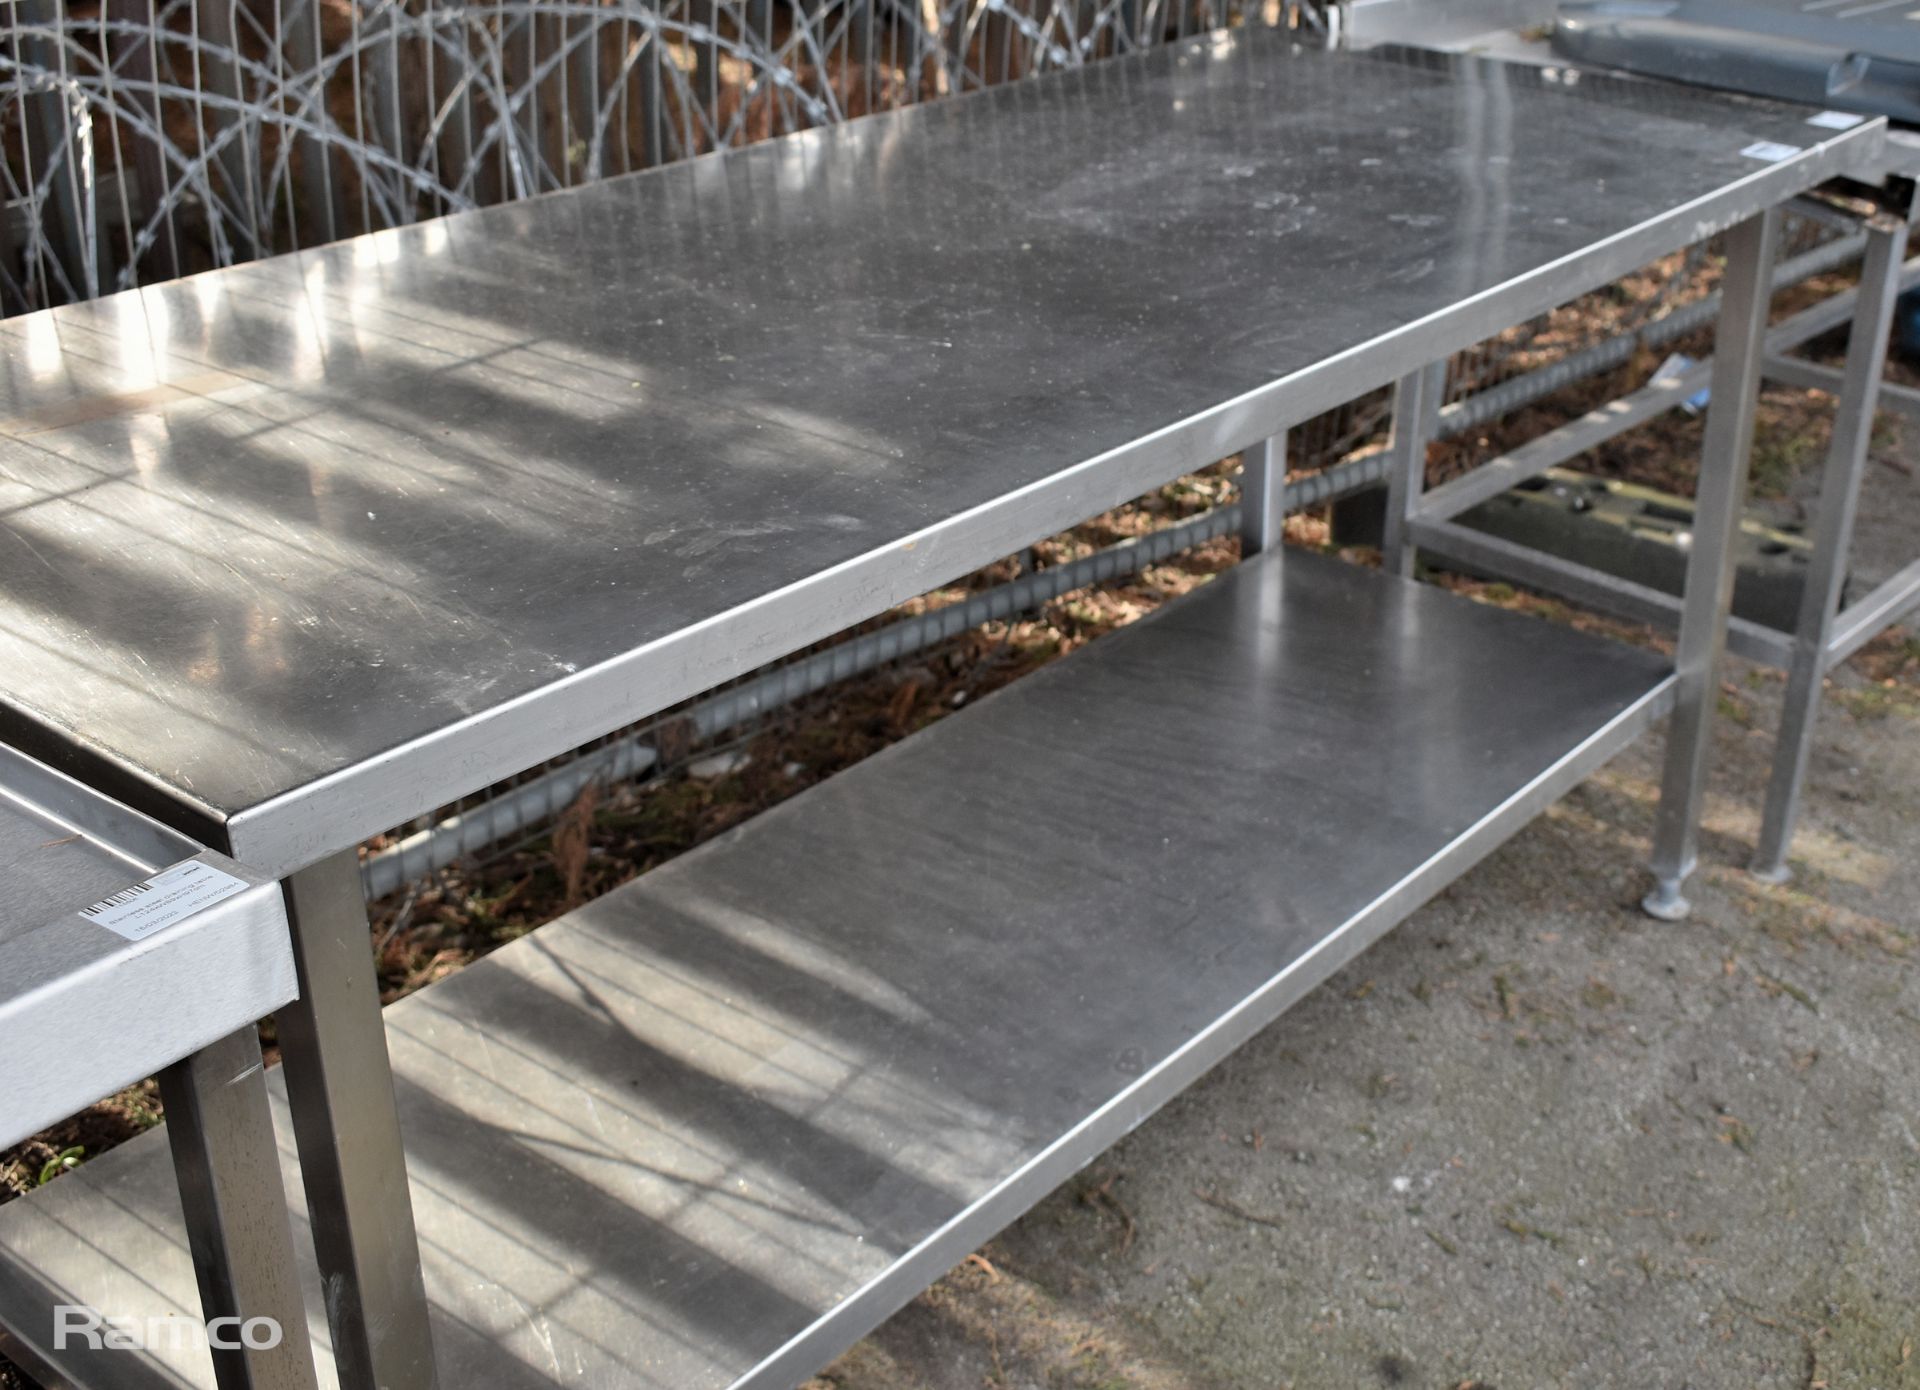 Stainless steel draining table - L 124 x W 89 x H 97cm, Stainless steel table with bottom shelf - Image 5 of 9